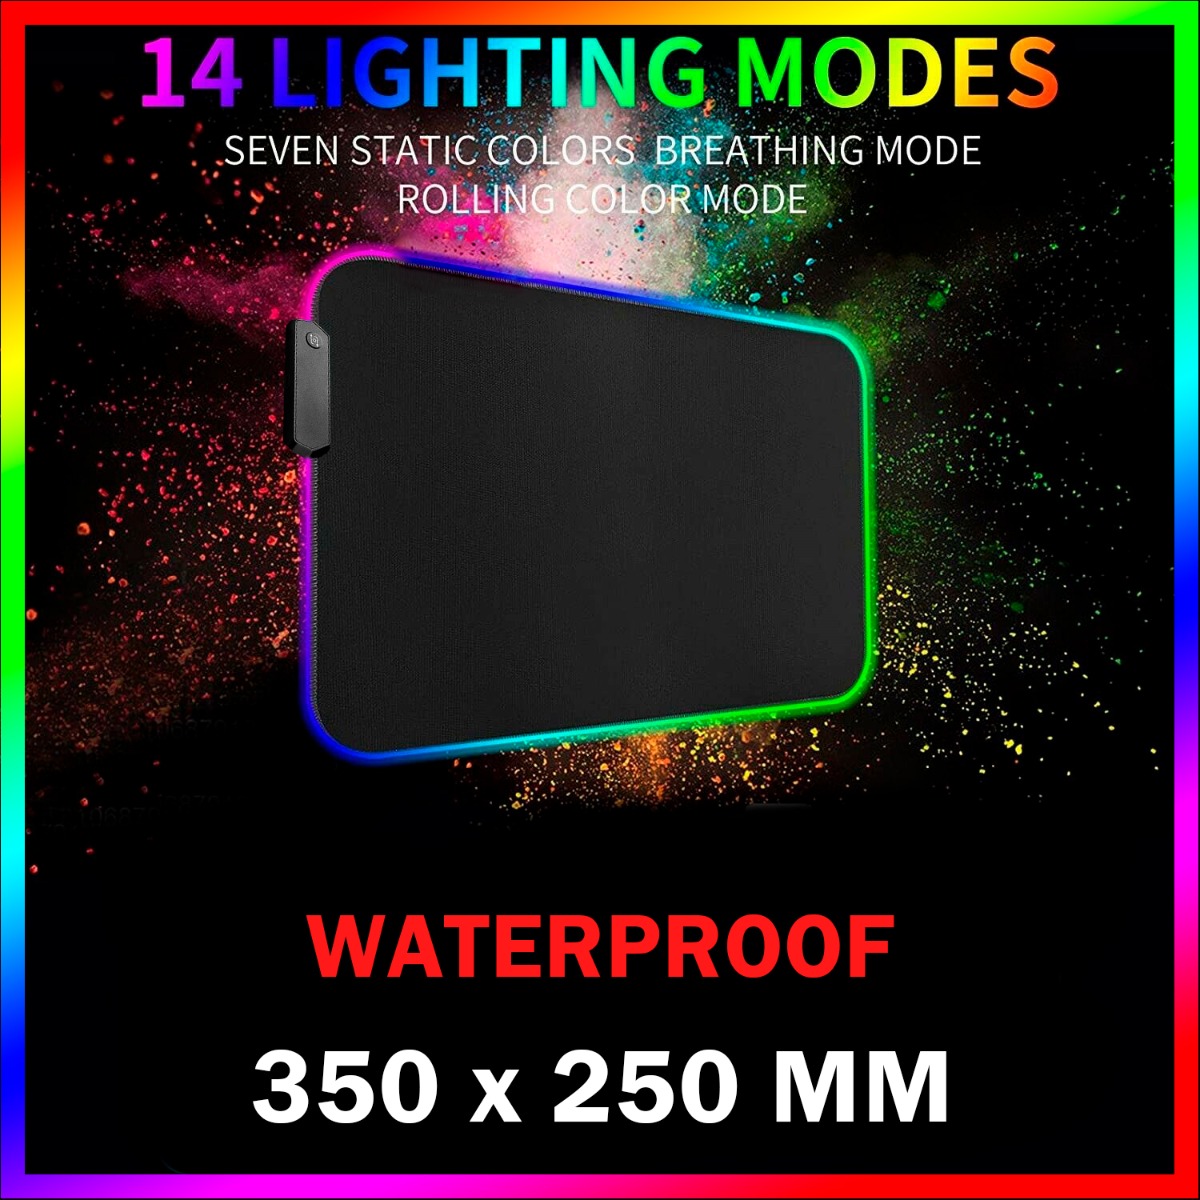 Led XXL Large Mouse Pads 31.5X11.8Inch with 12 Lighting Modes Extended Long Mouse Mat Water Resistance Non-Slip Rubber Base Mousepads for Computer Keyboard PC Laptop YXLILI RGB Gaming Mouse Pad 